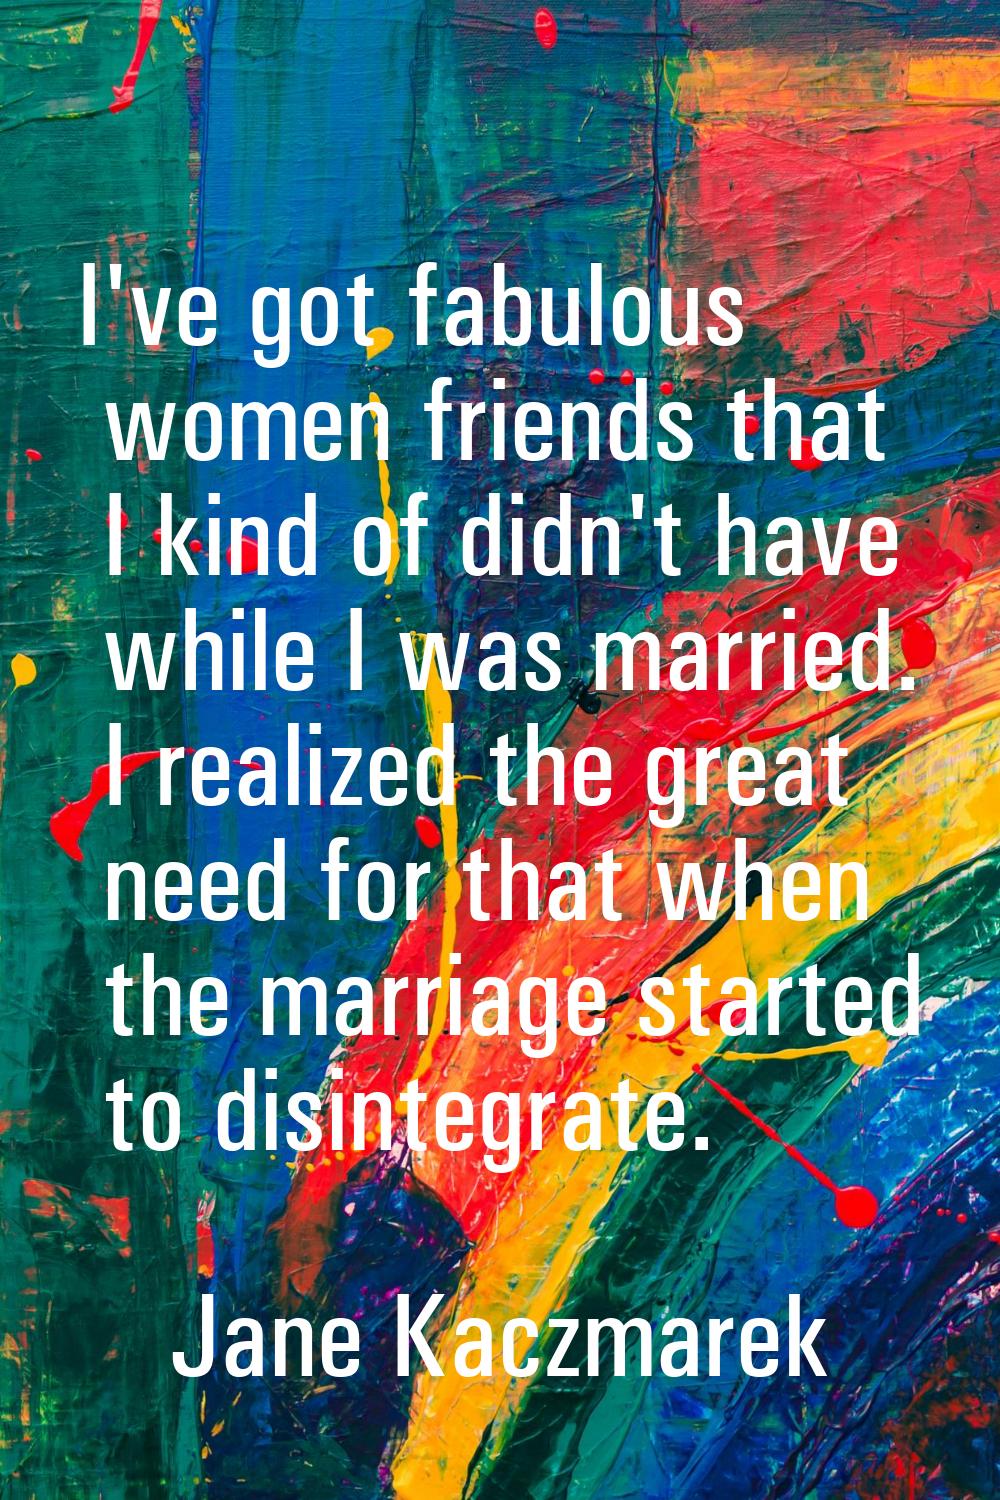 I've got fabulous women friends that I kind of didn't have while I was married. I realized the grea